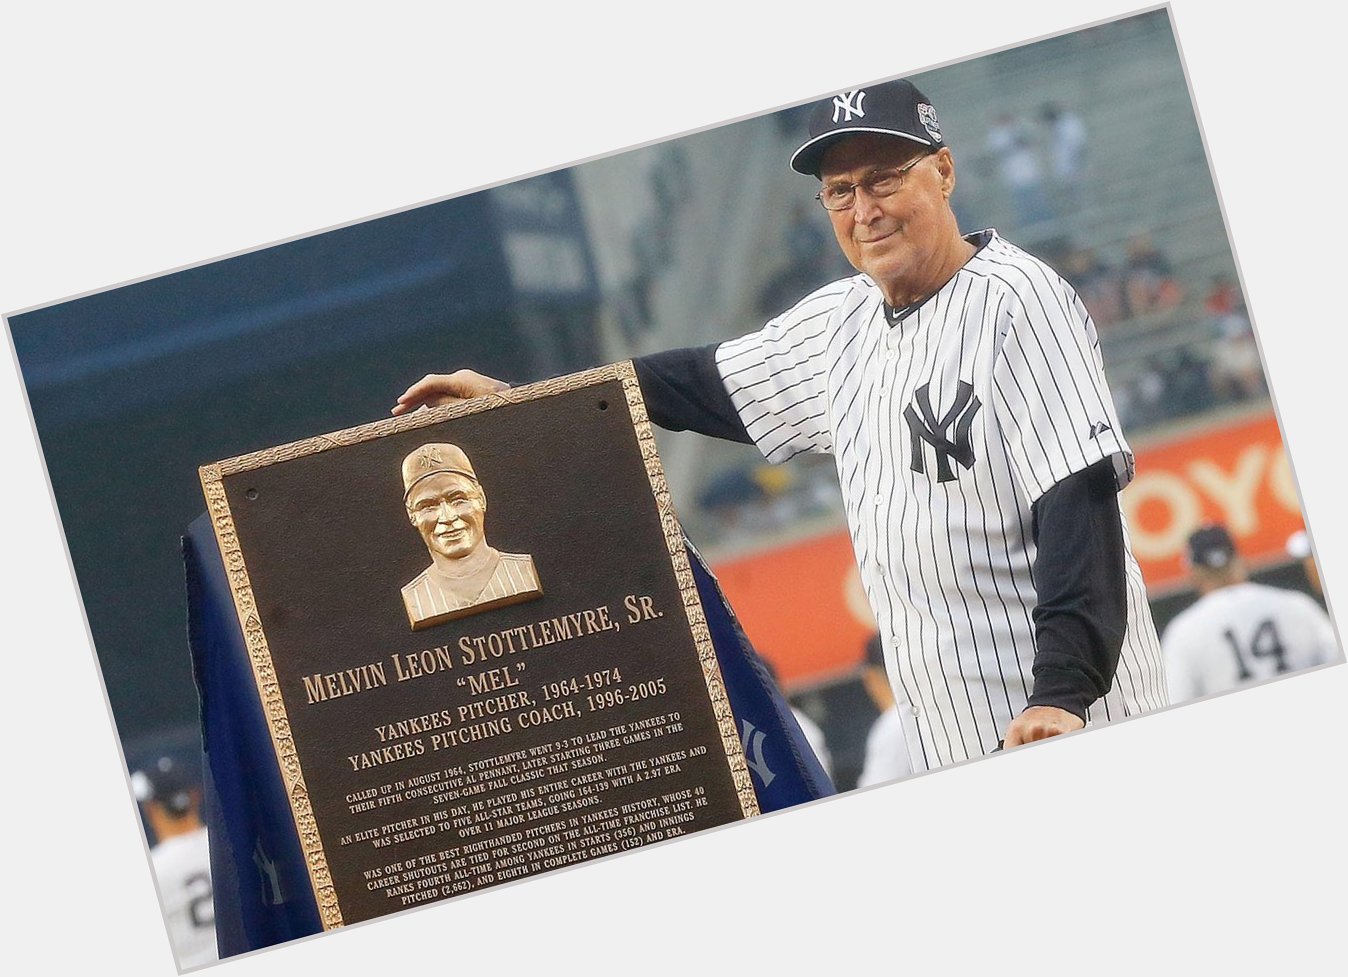 A very happy birthday to the great Mel Stottlemyre!!! 